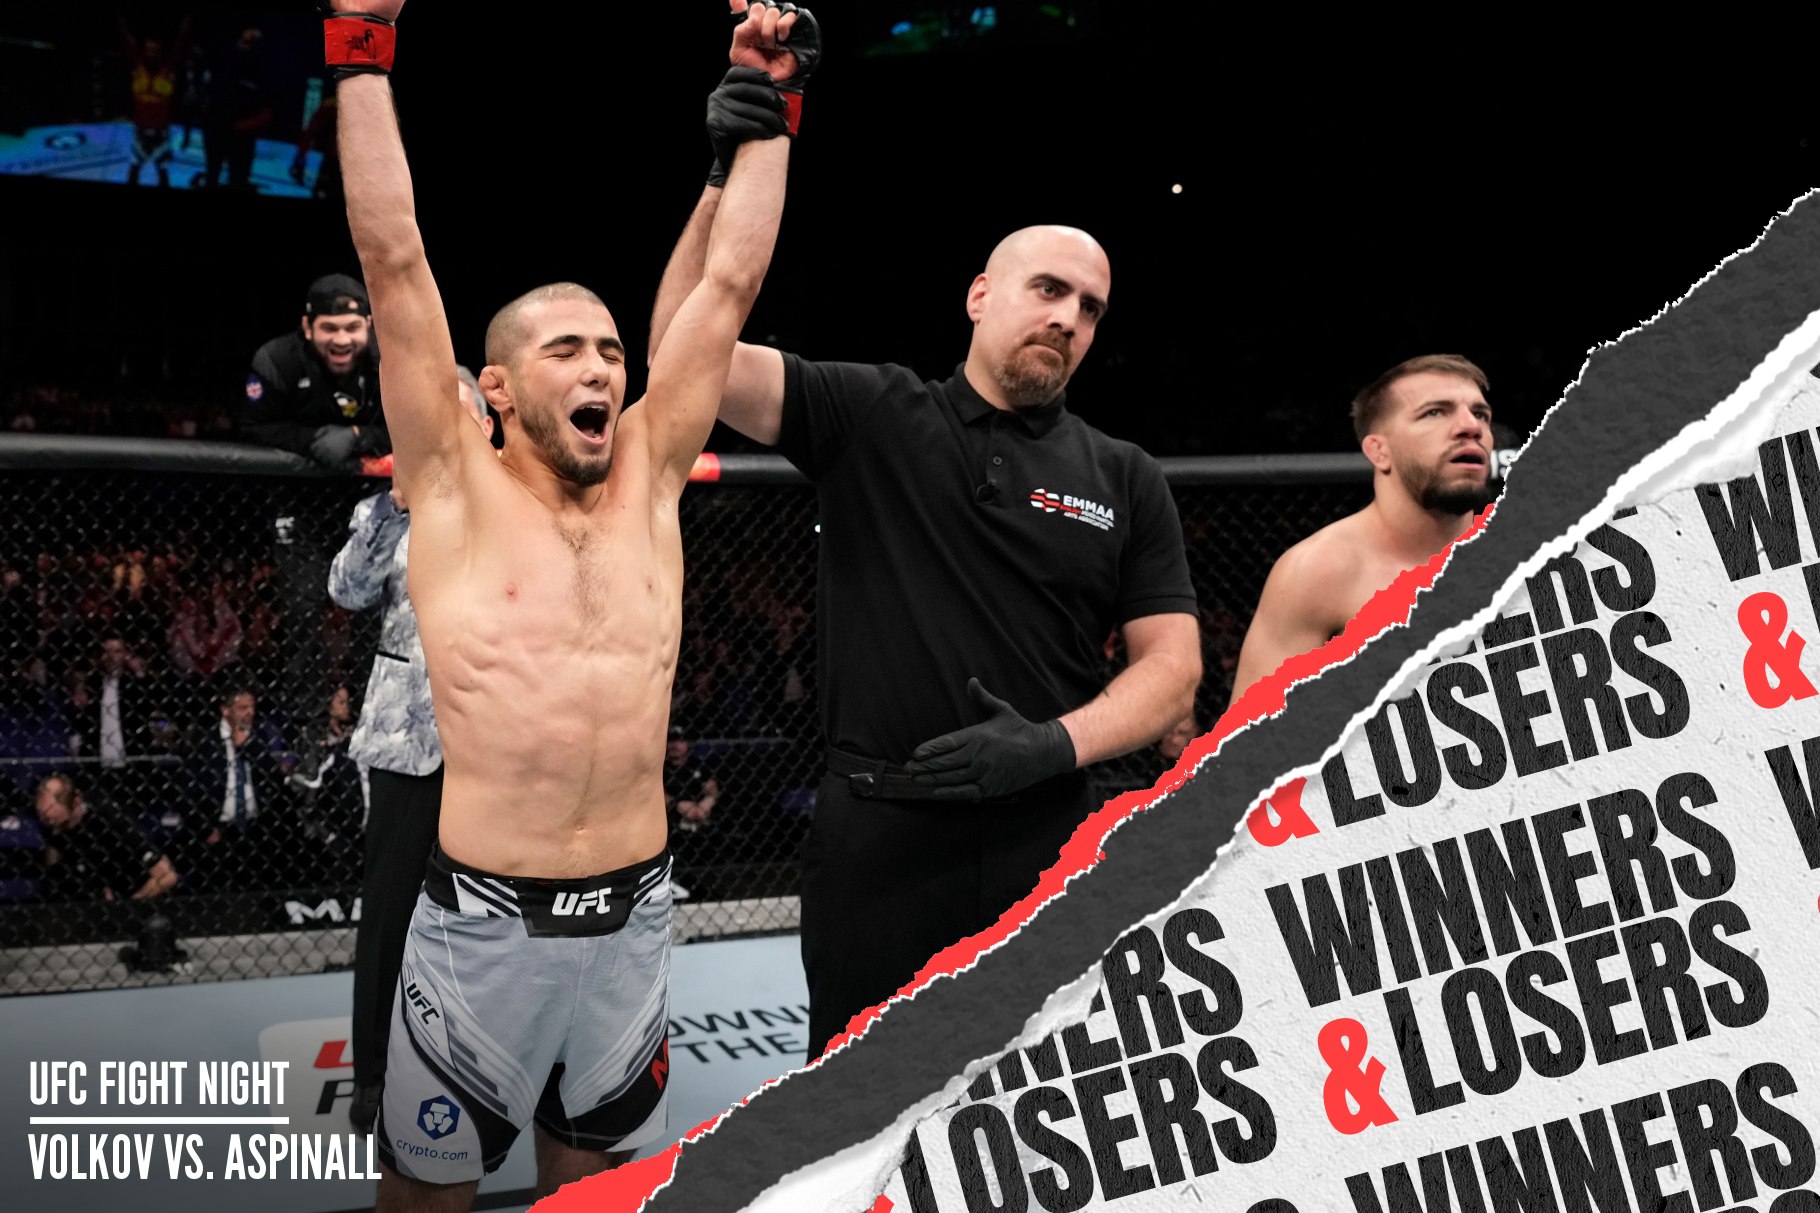 Muhammed Mokaev made a spectacular UFC debut with a 58-second finish of Cody Curden at UFC London.